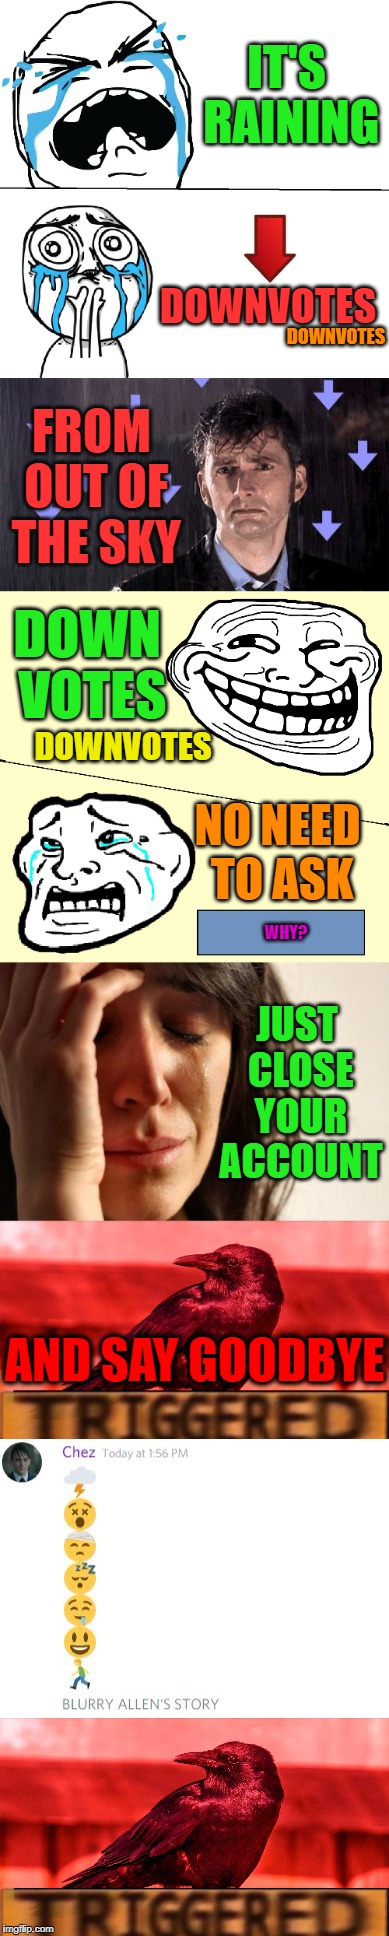 Please Close My Account | IT'S RAINING; DOWNVOTES; DOWNVOTES; FROM OUT OF THE SKY; DOWN VOTES; DOWNVOTES; NO NEED TO ASK; WHY? JUST CLOSE YOUR ACCOUNT; AND SAY GOODBYE | image tagged in help | made w/ Imgflip meme maker